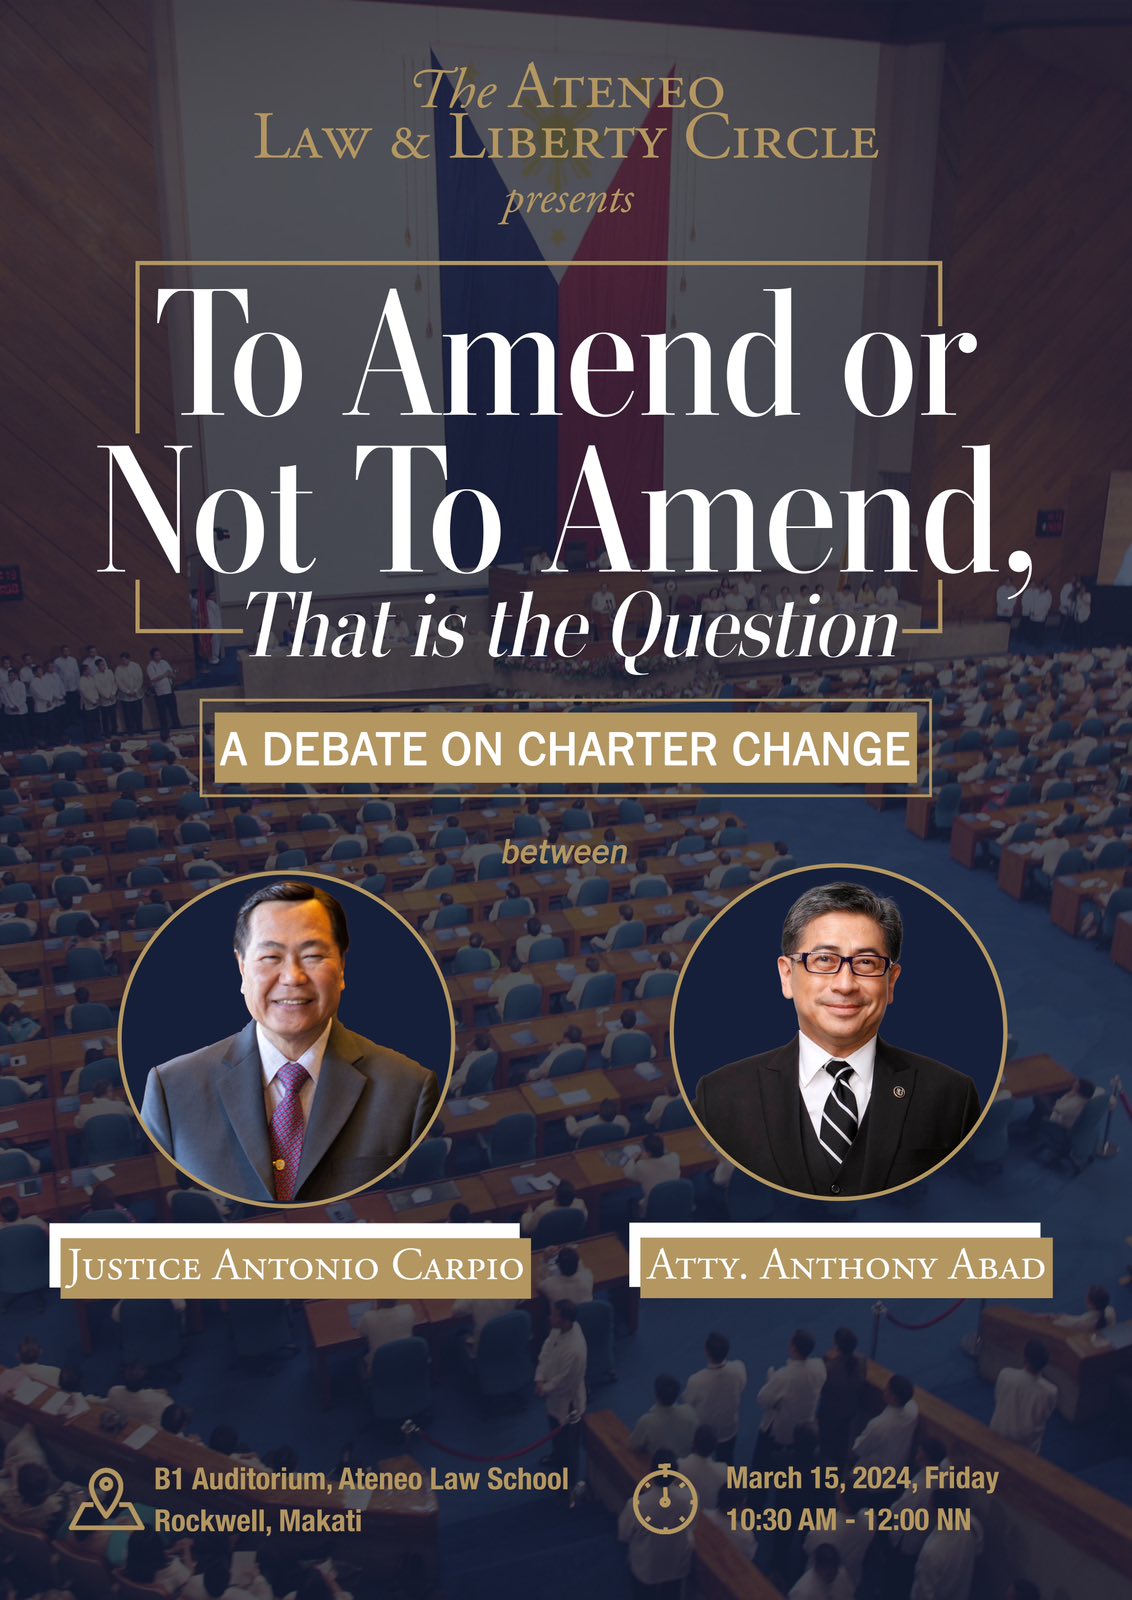 The poster of “To Amend or Not To Amend” 